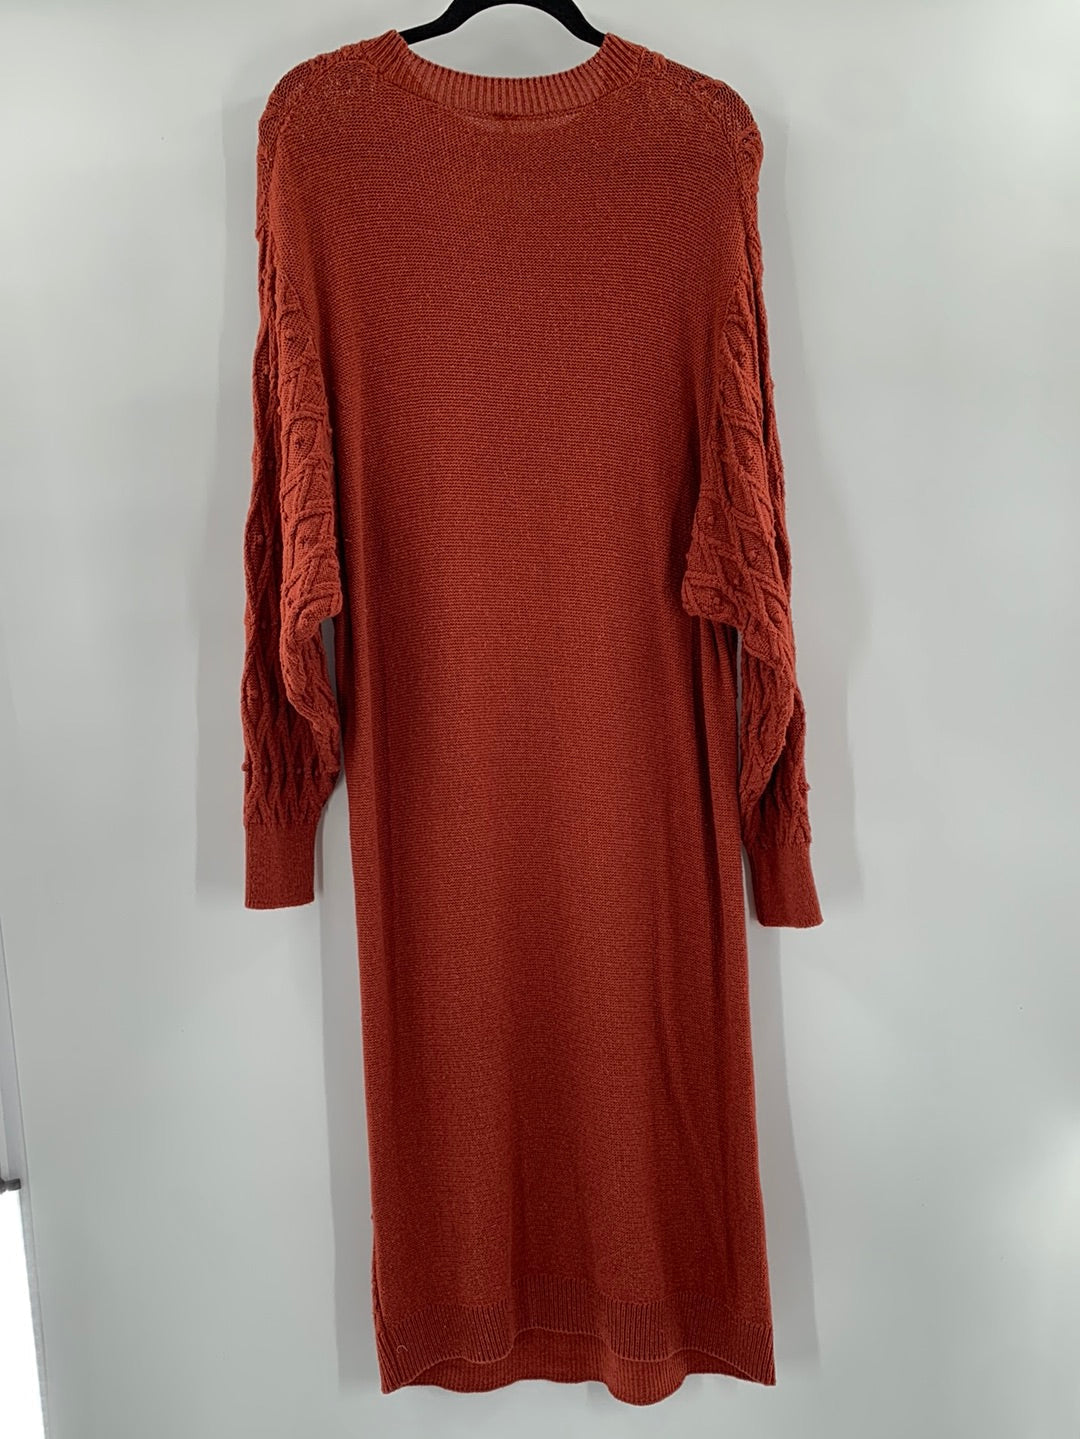 Free People Burnt Orange Cable Knit Maxi (XS)